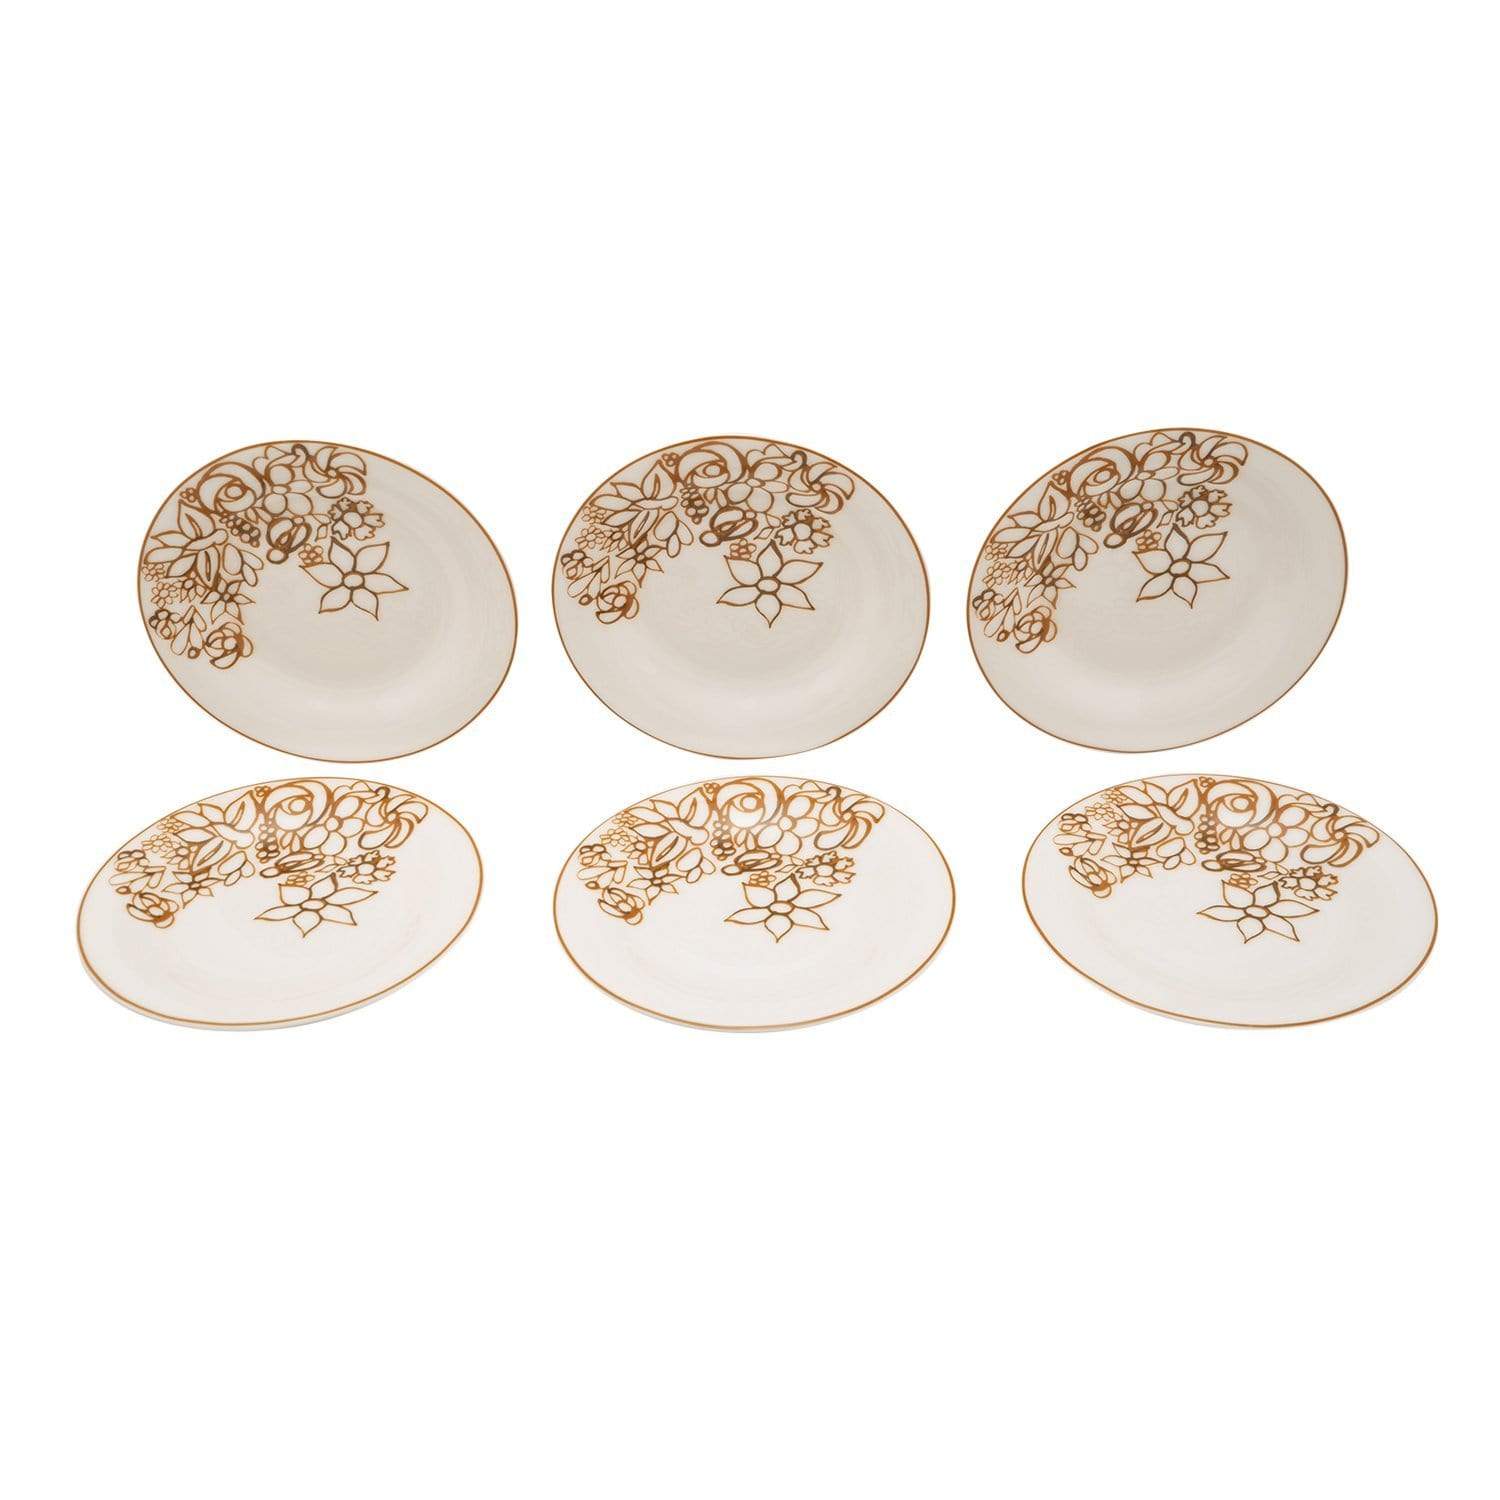 L'atelier FB Embroidery Coupe Shape Round Cookies Plate Set - 16 cm, 6 Pieces - TC 4715 013 - Jashanmal Home